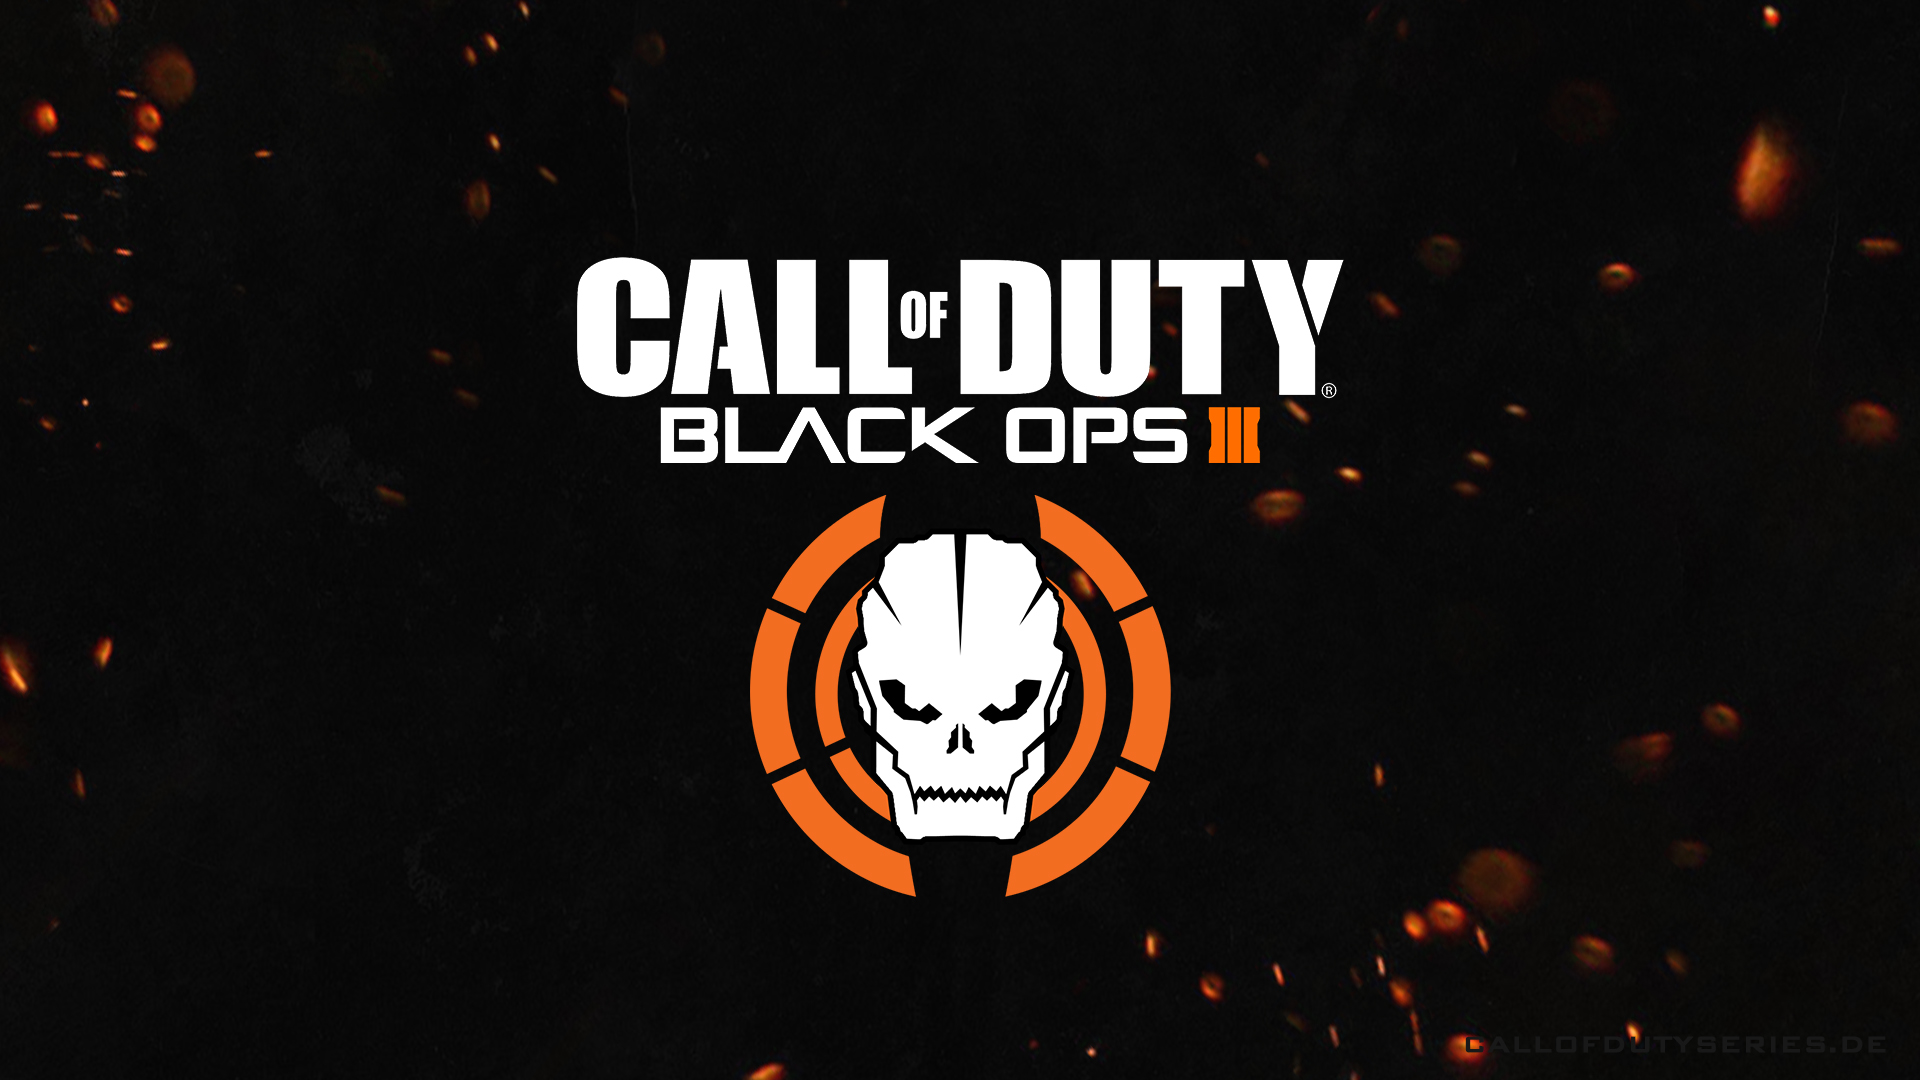 Free Download Call Of Duty Black Ops 3 Logo Hd Wallpaper 19x1080 19x1080 For Your Desktop Mobile Tablet Explore 48 Black Ops 3 Wallpaper 19x1080 Black Ops 3 Wallpaper